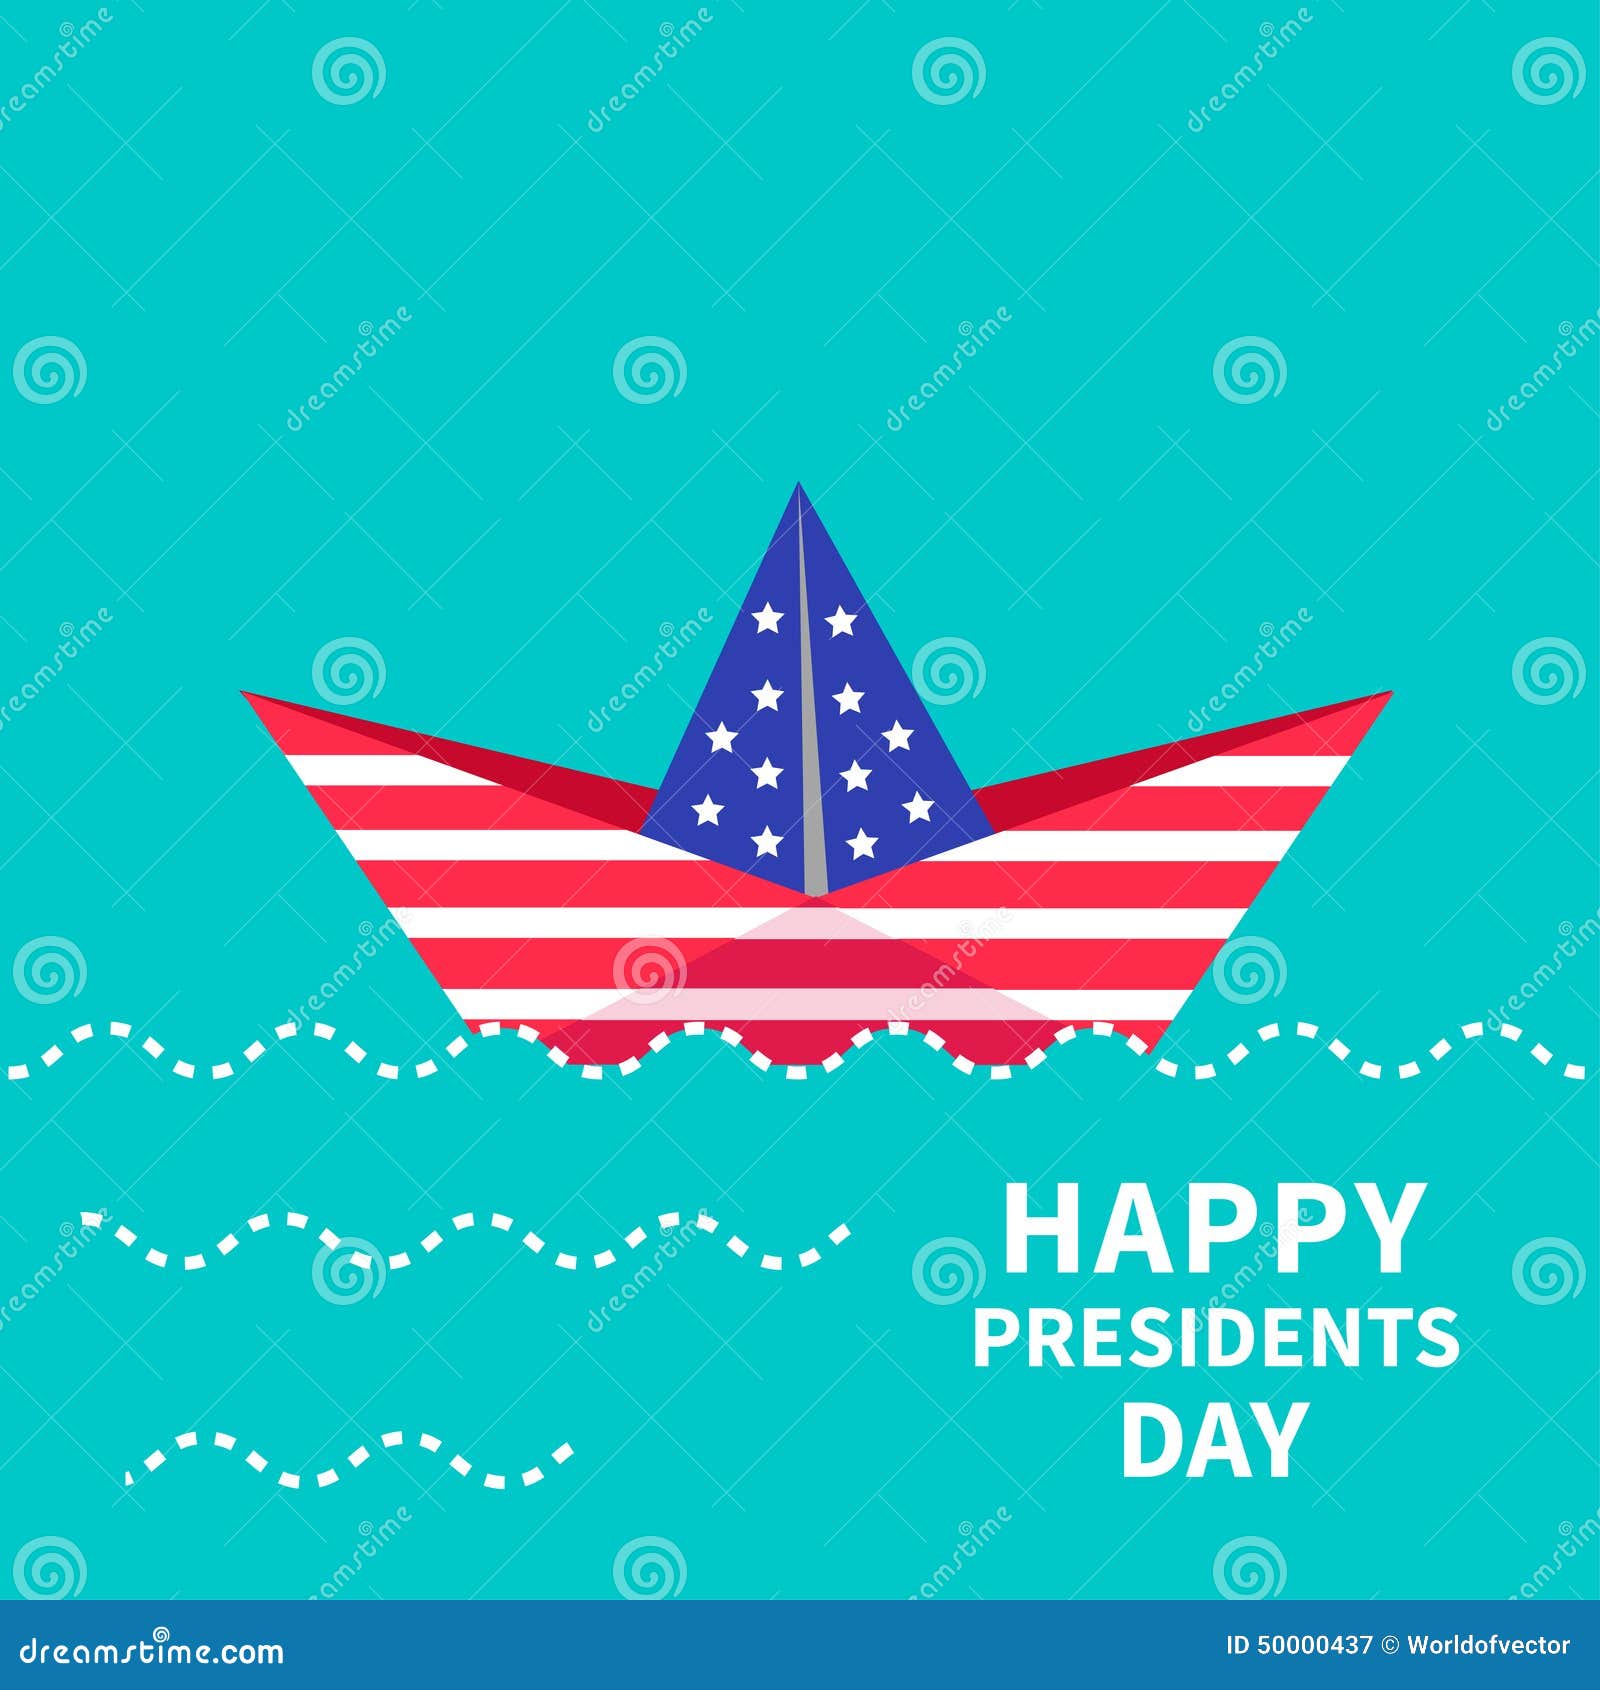 Presidents Day Background Paper Boat. Dash Line Stock Vector - Image: 500004371300 x 1390